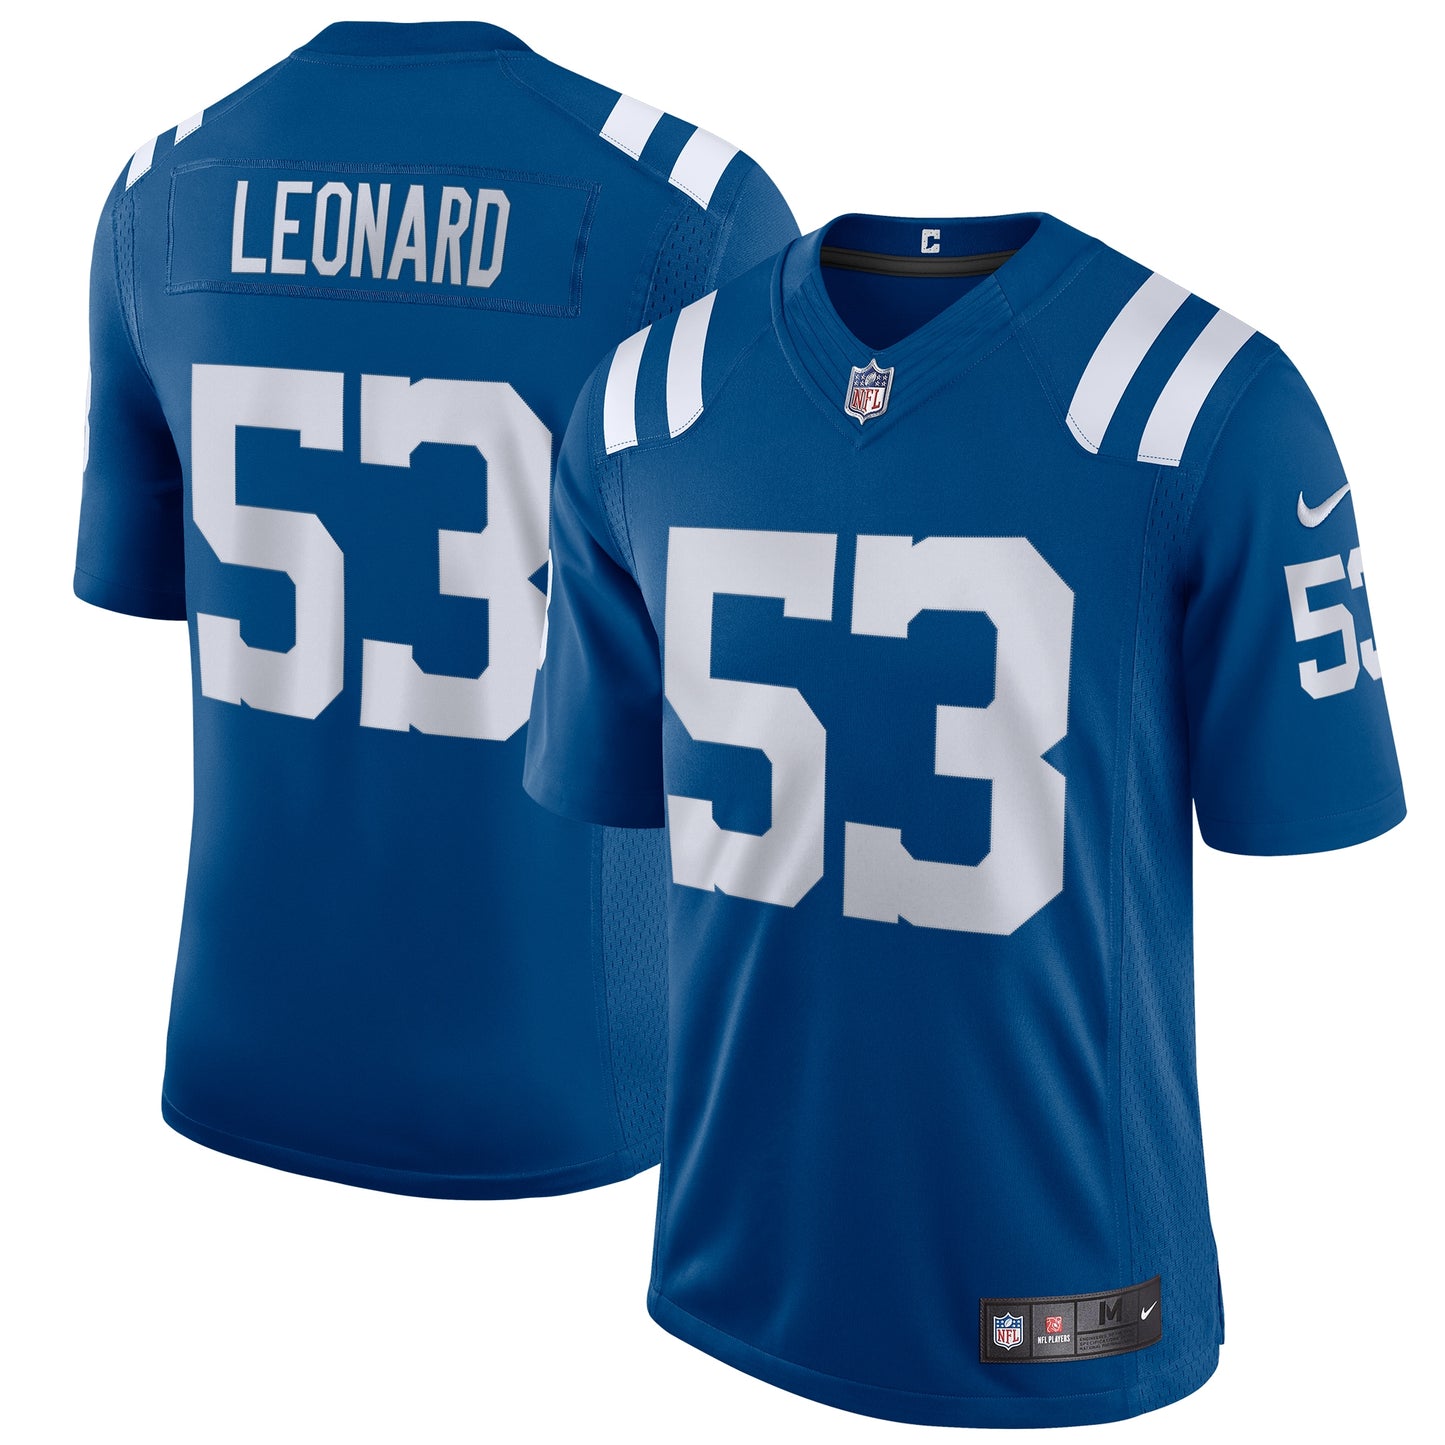 Shaquille Leonard Indianapolis Colts Nike Vapor Limited Jersey - Royal